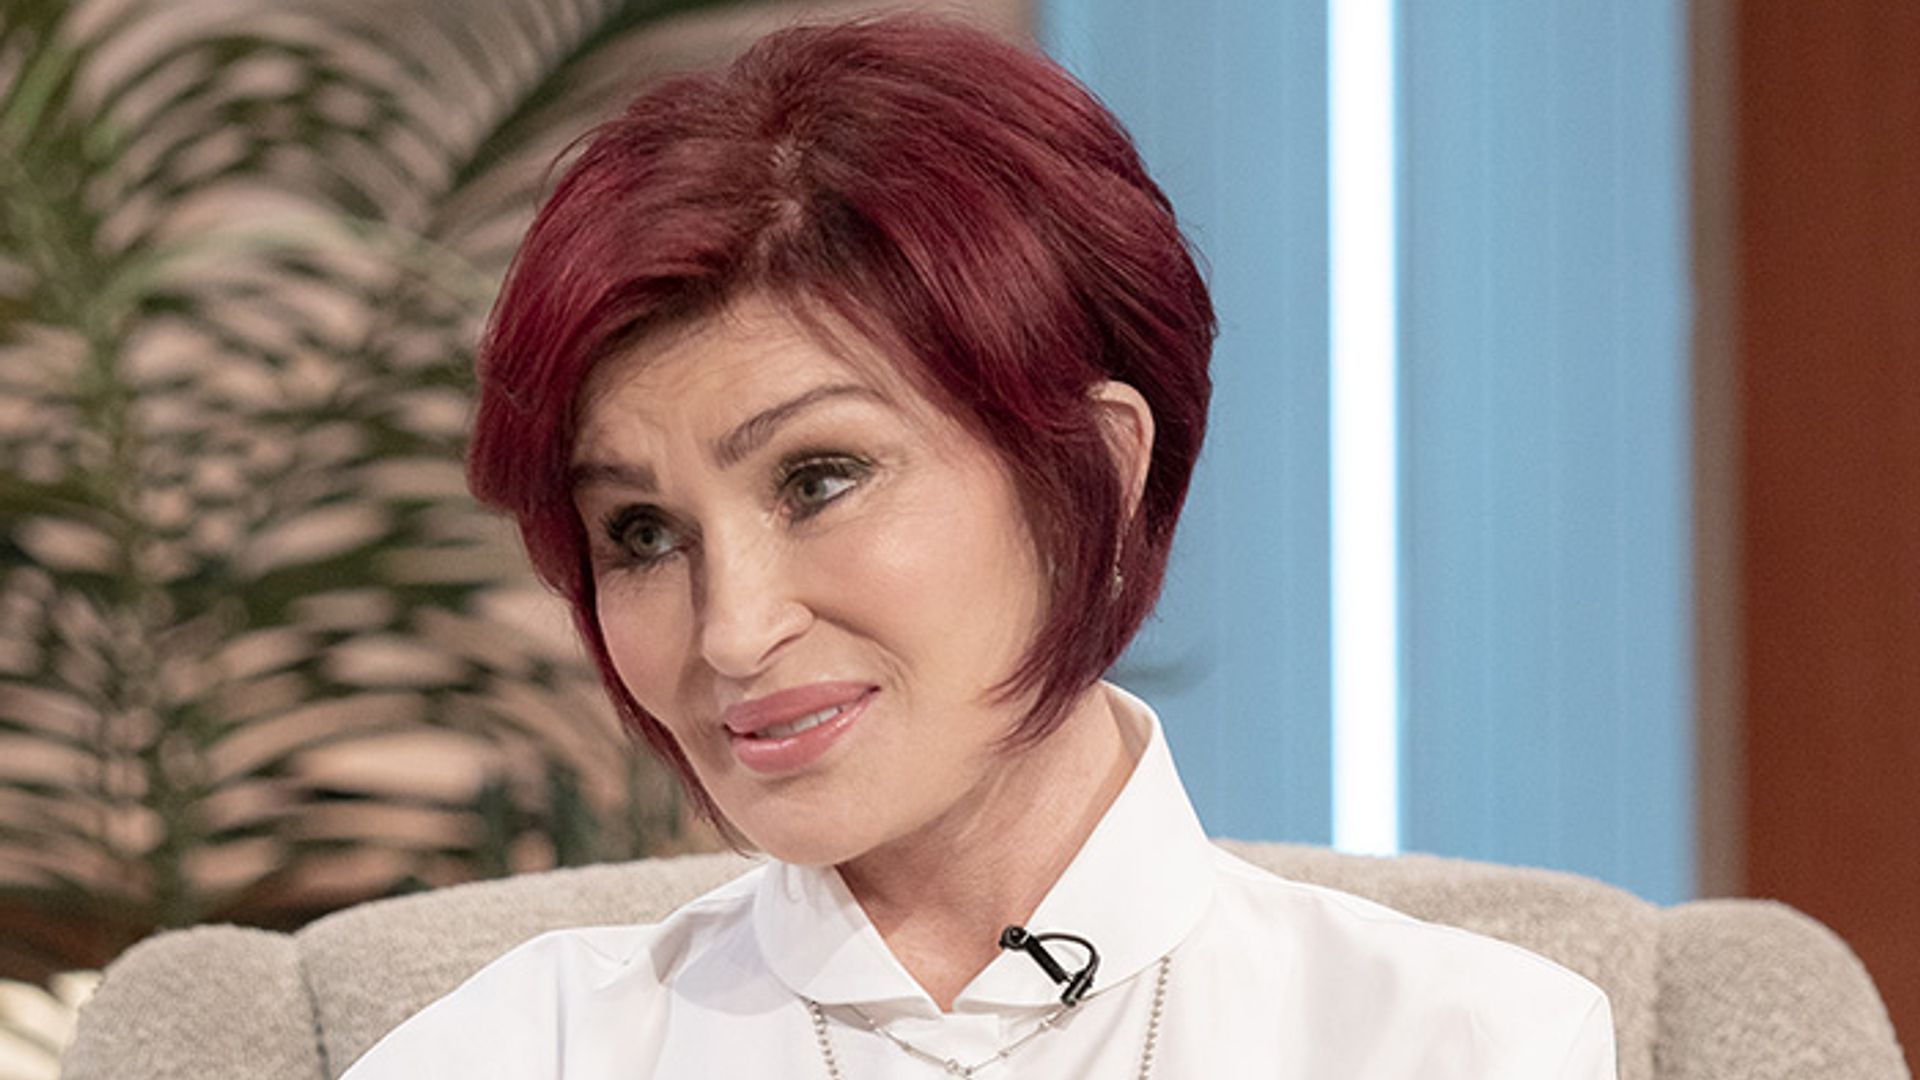 Sharon Osbourne showcases dramatic weight loss 'I didn't want to go